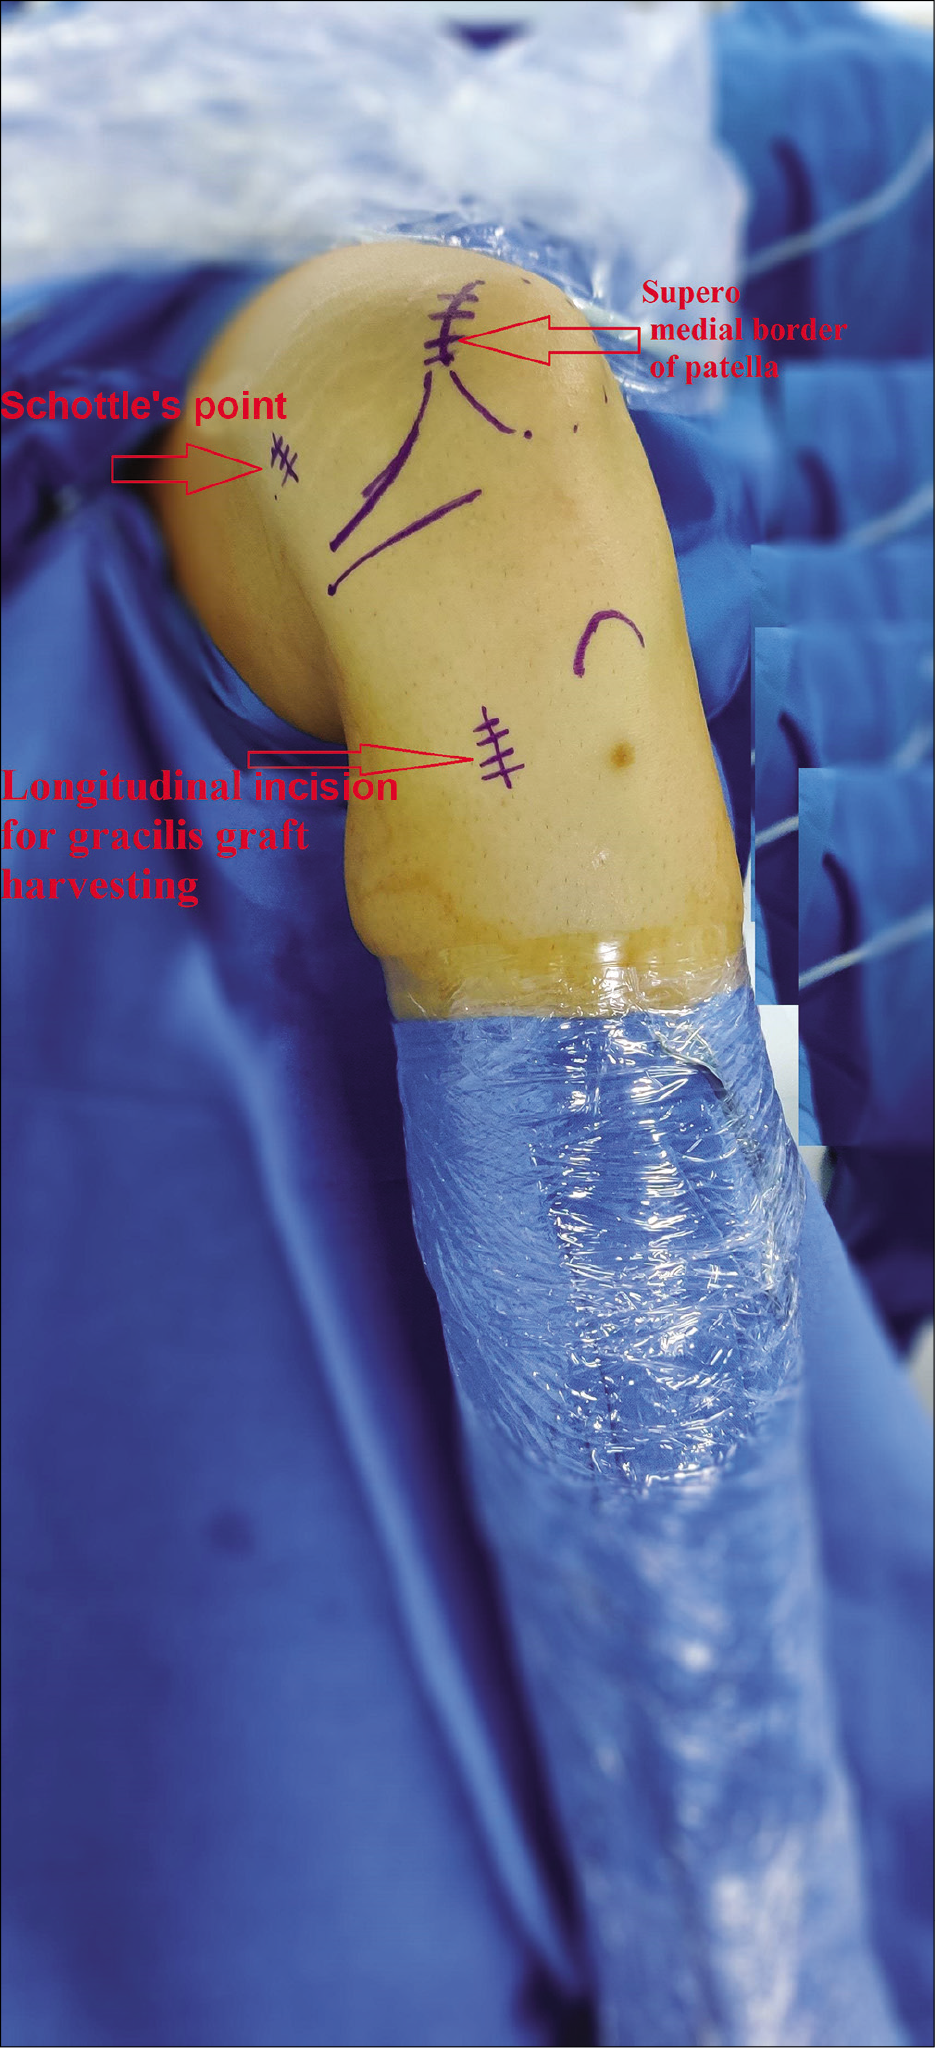 A 27-year-old man who presented with recurrent patellar dislocation in his left knee. He was planned for medial patellofemoral ligament reconstruction. Landmarks were drawn after painting and draping. Schottels point, Superomedial border of patella and Longitudinal incision for gracilis graft harvesting are shown by arrows.